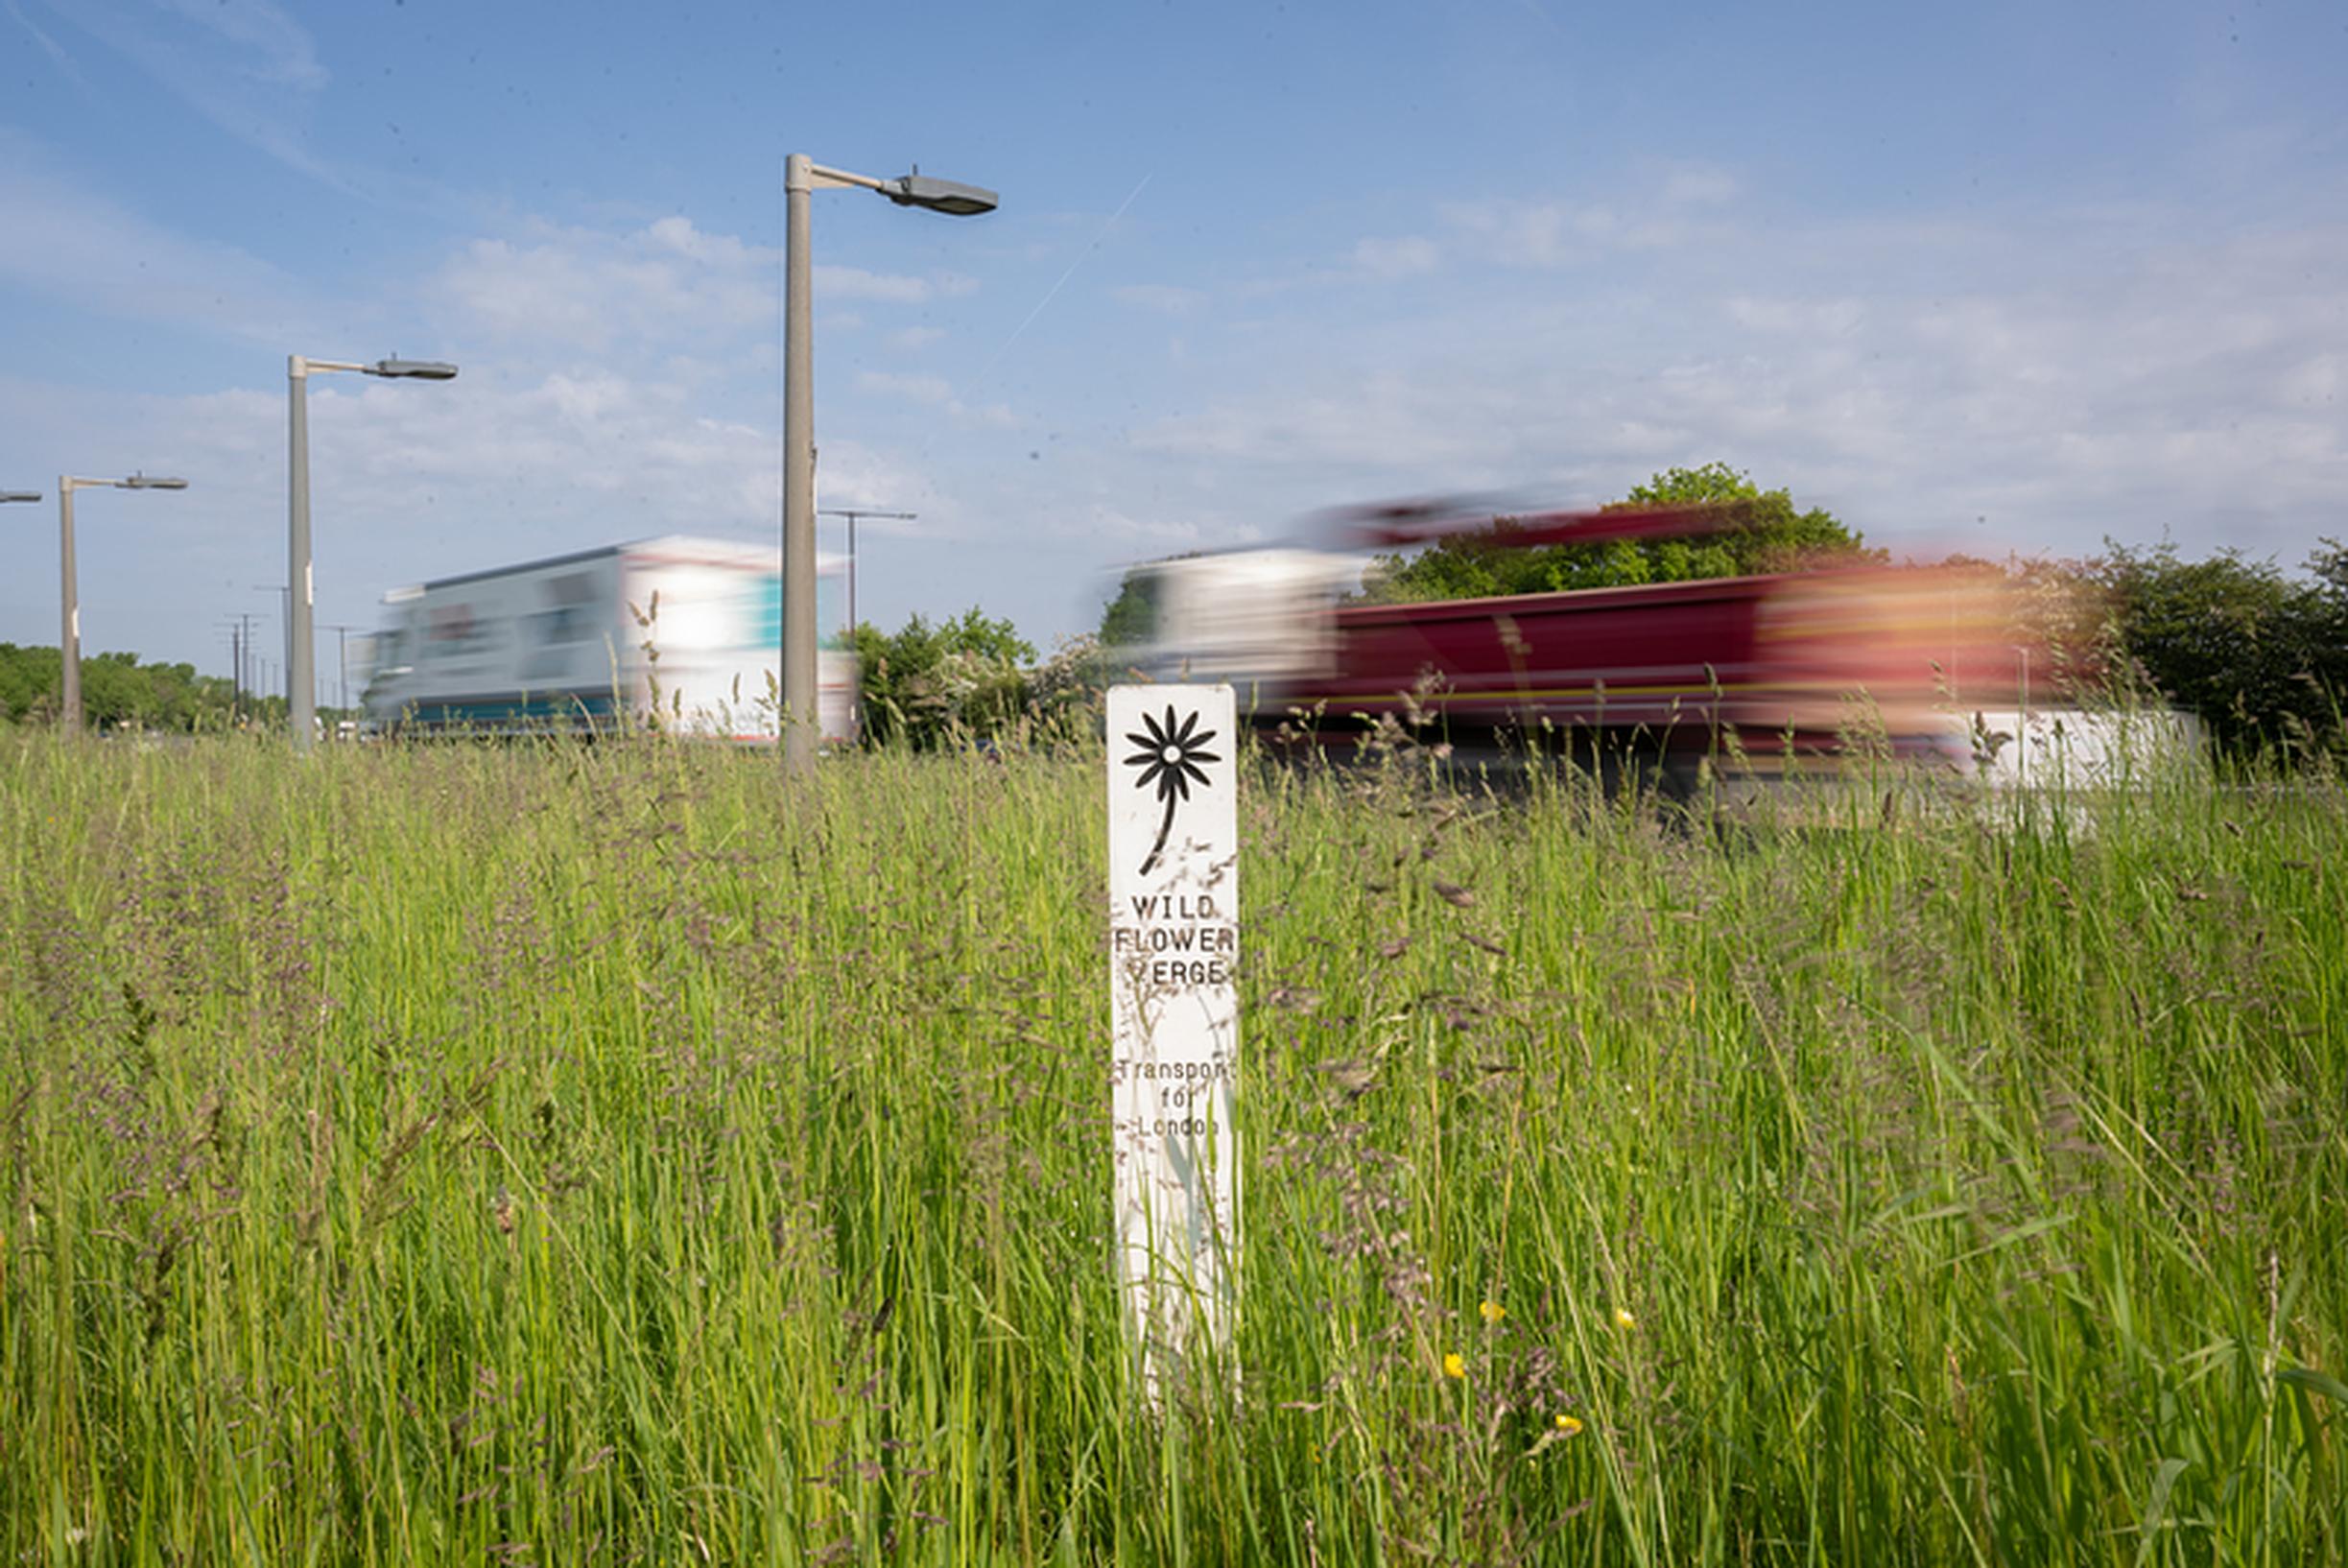 Signage will be installed to make clear that verges are being managed to encourage wildflower growth